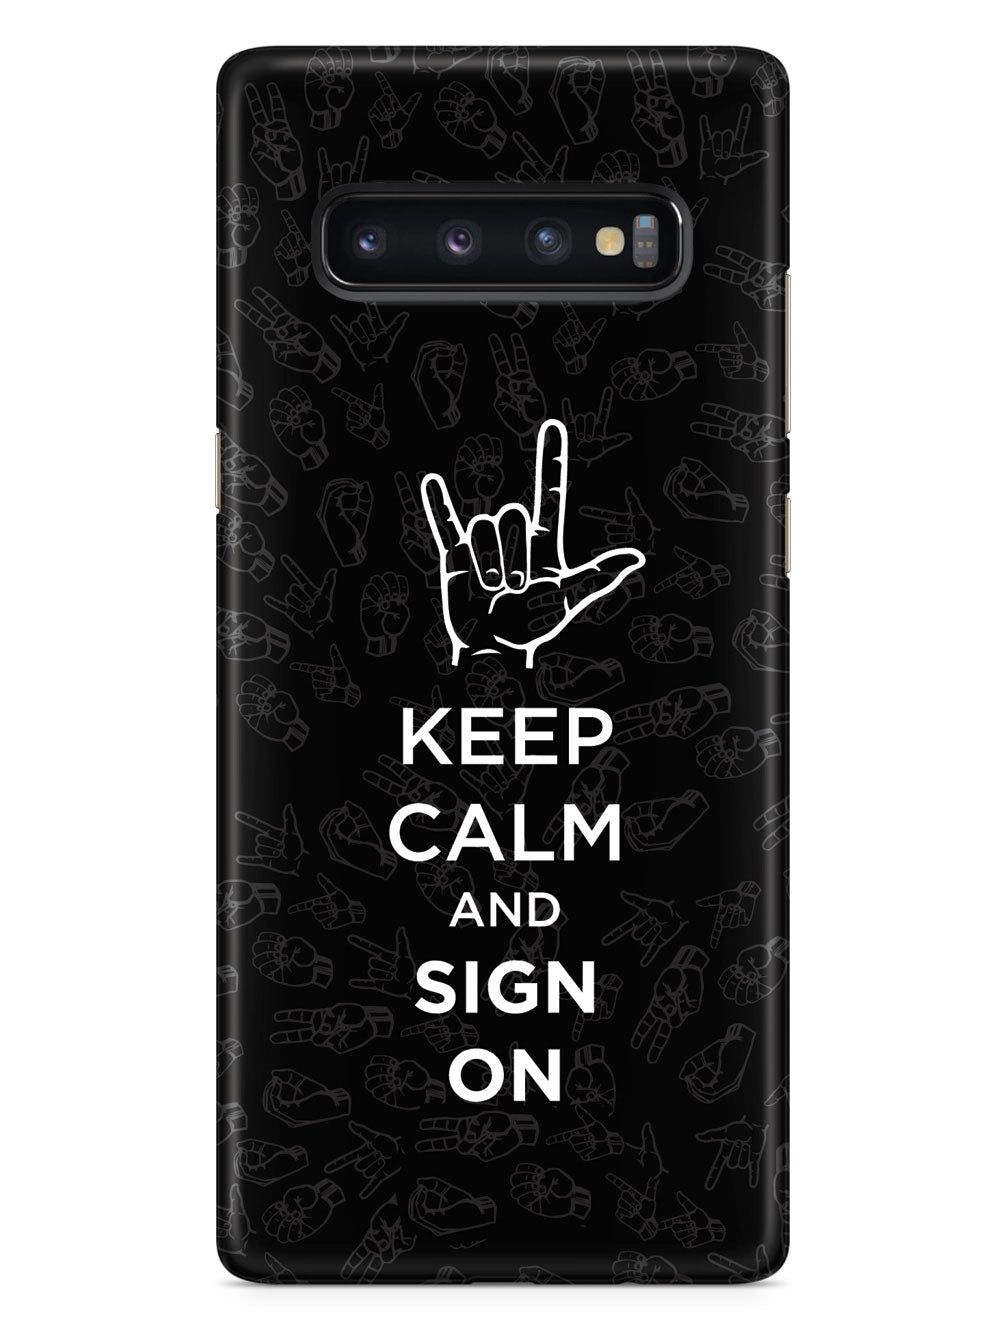 Keep Calm & Sign On - Sign Language Case